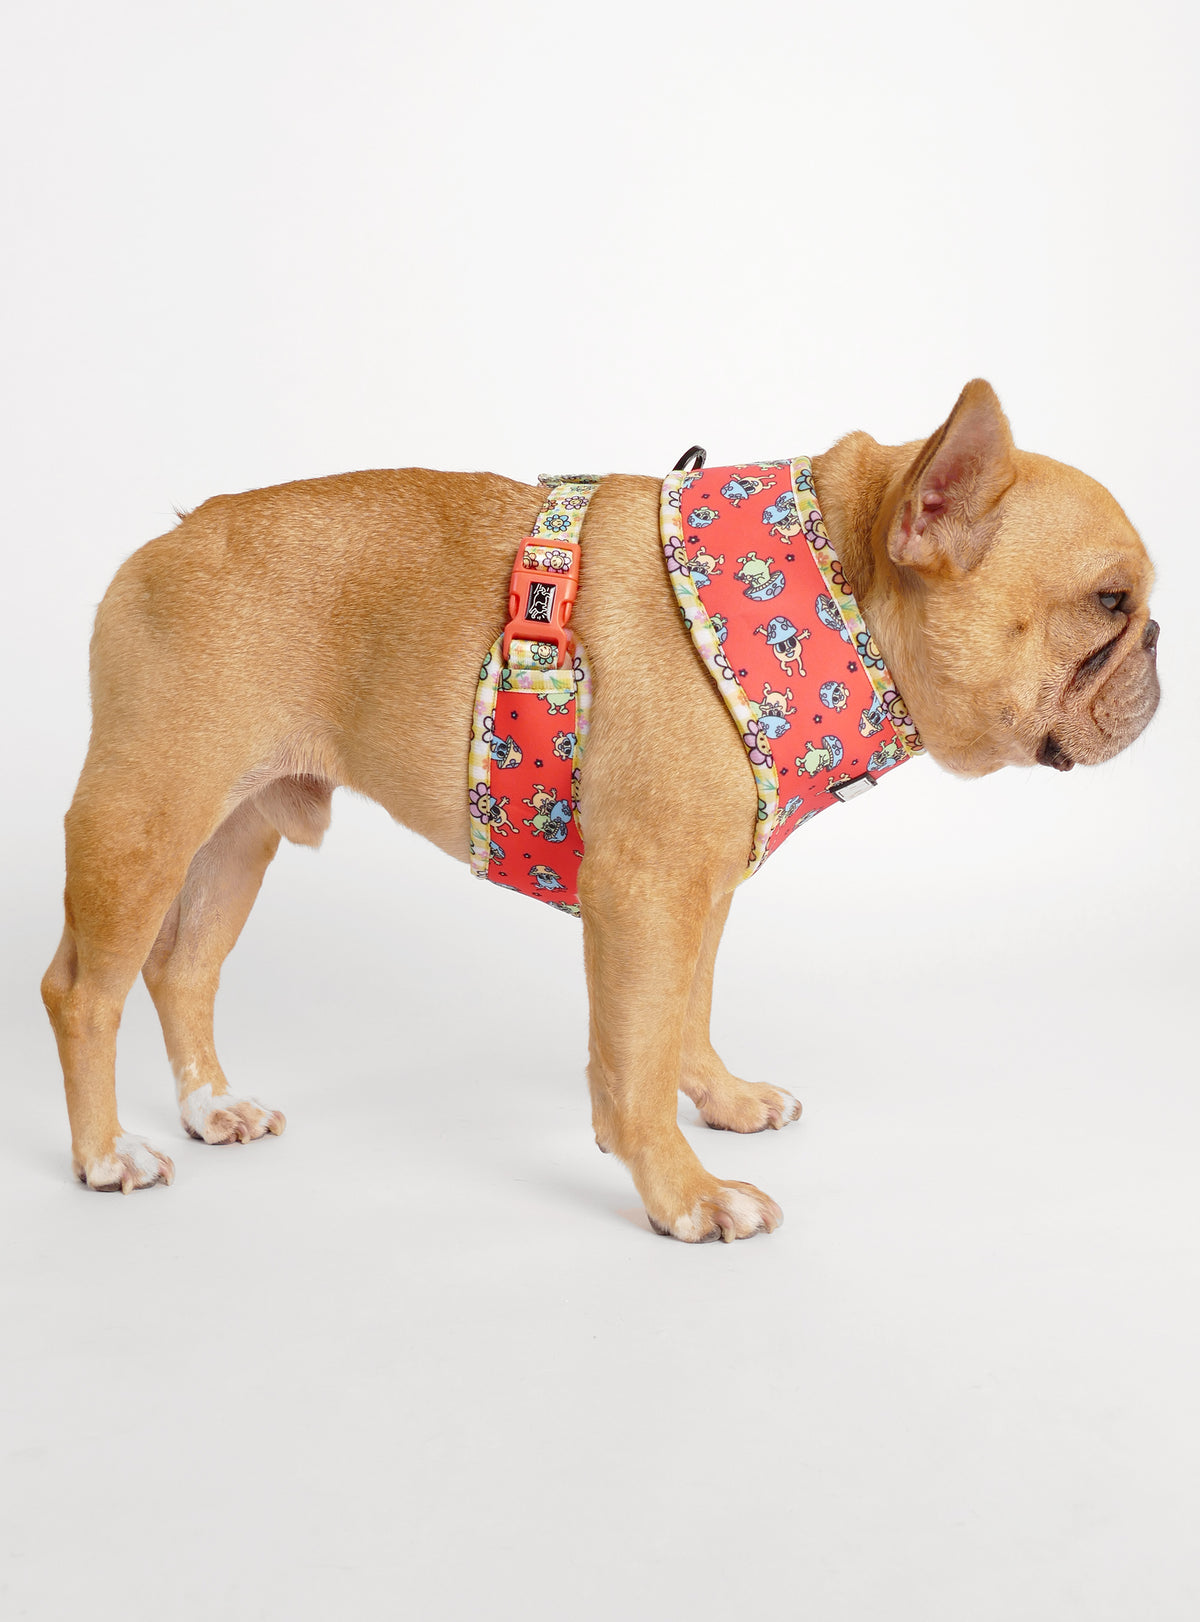 The Mushroom Party Reversible Harness